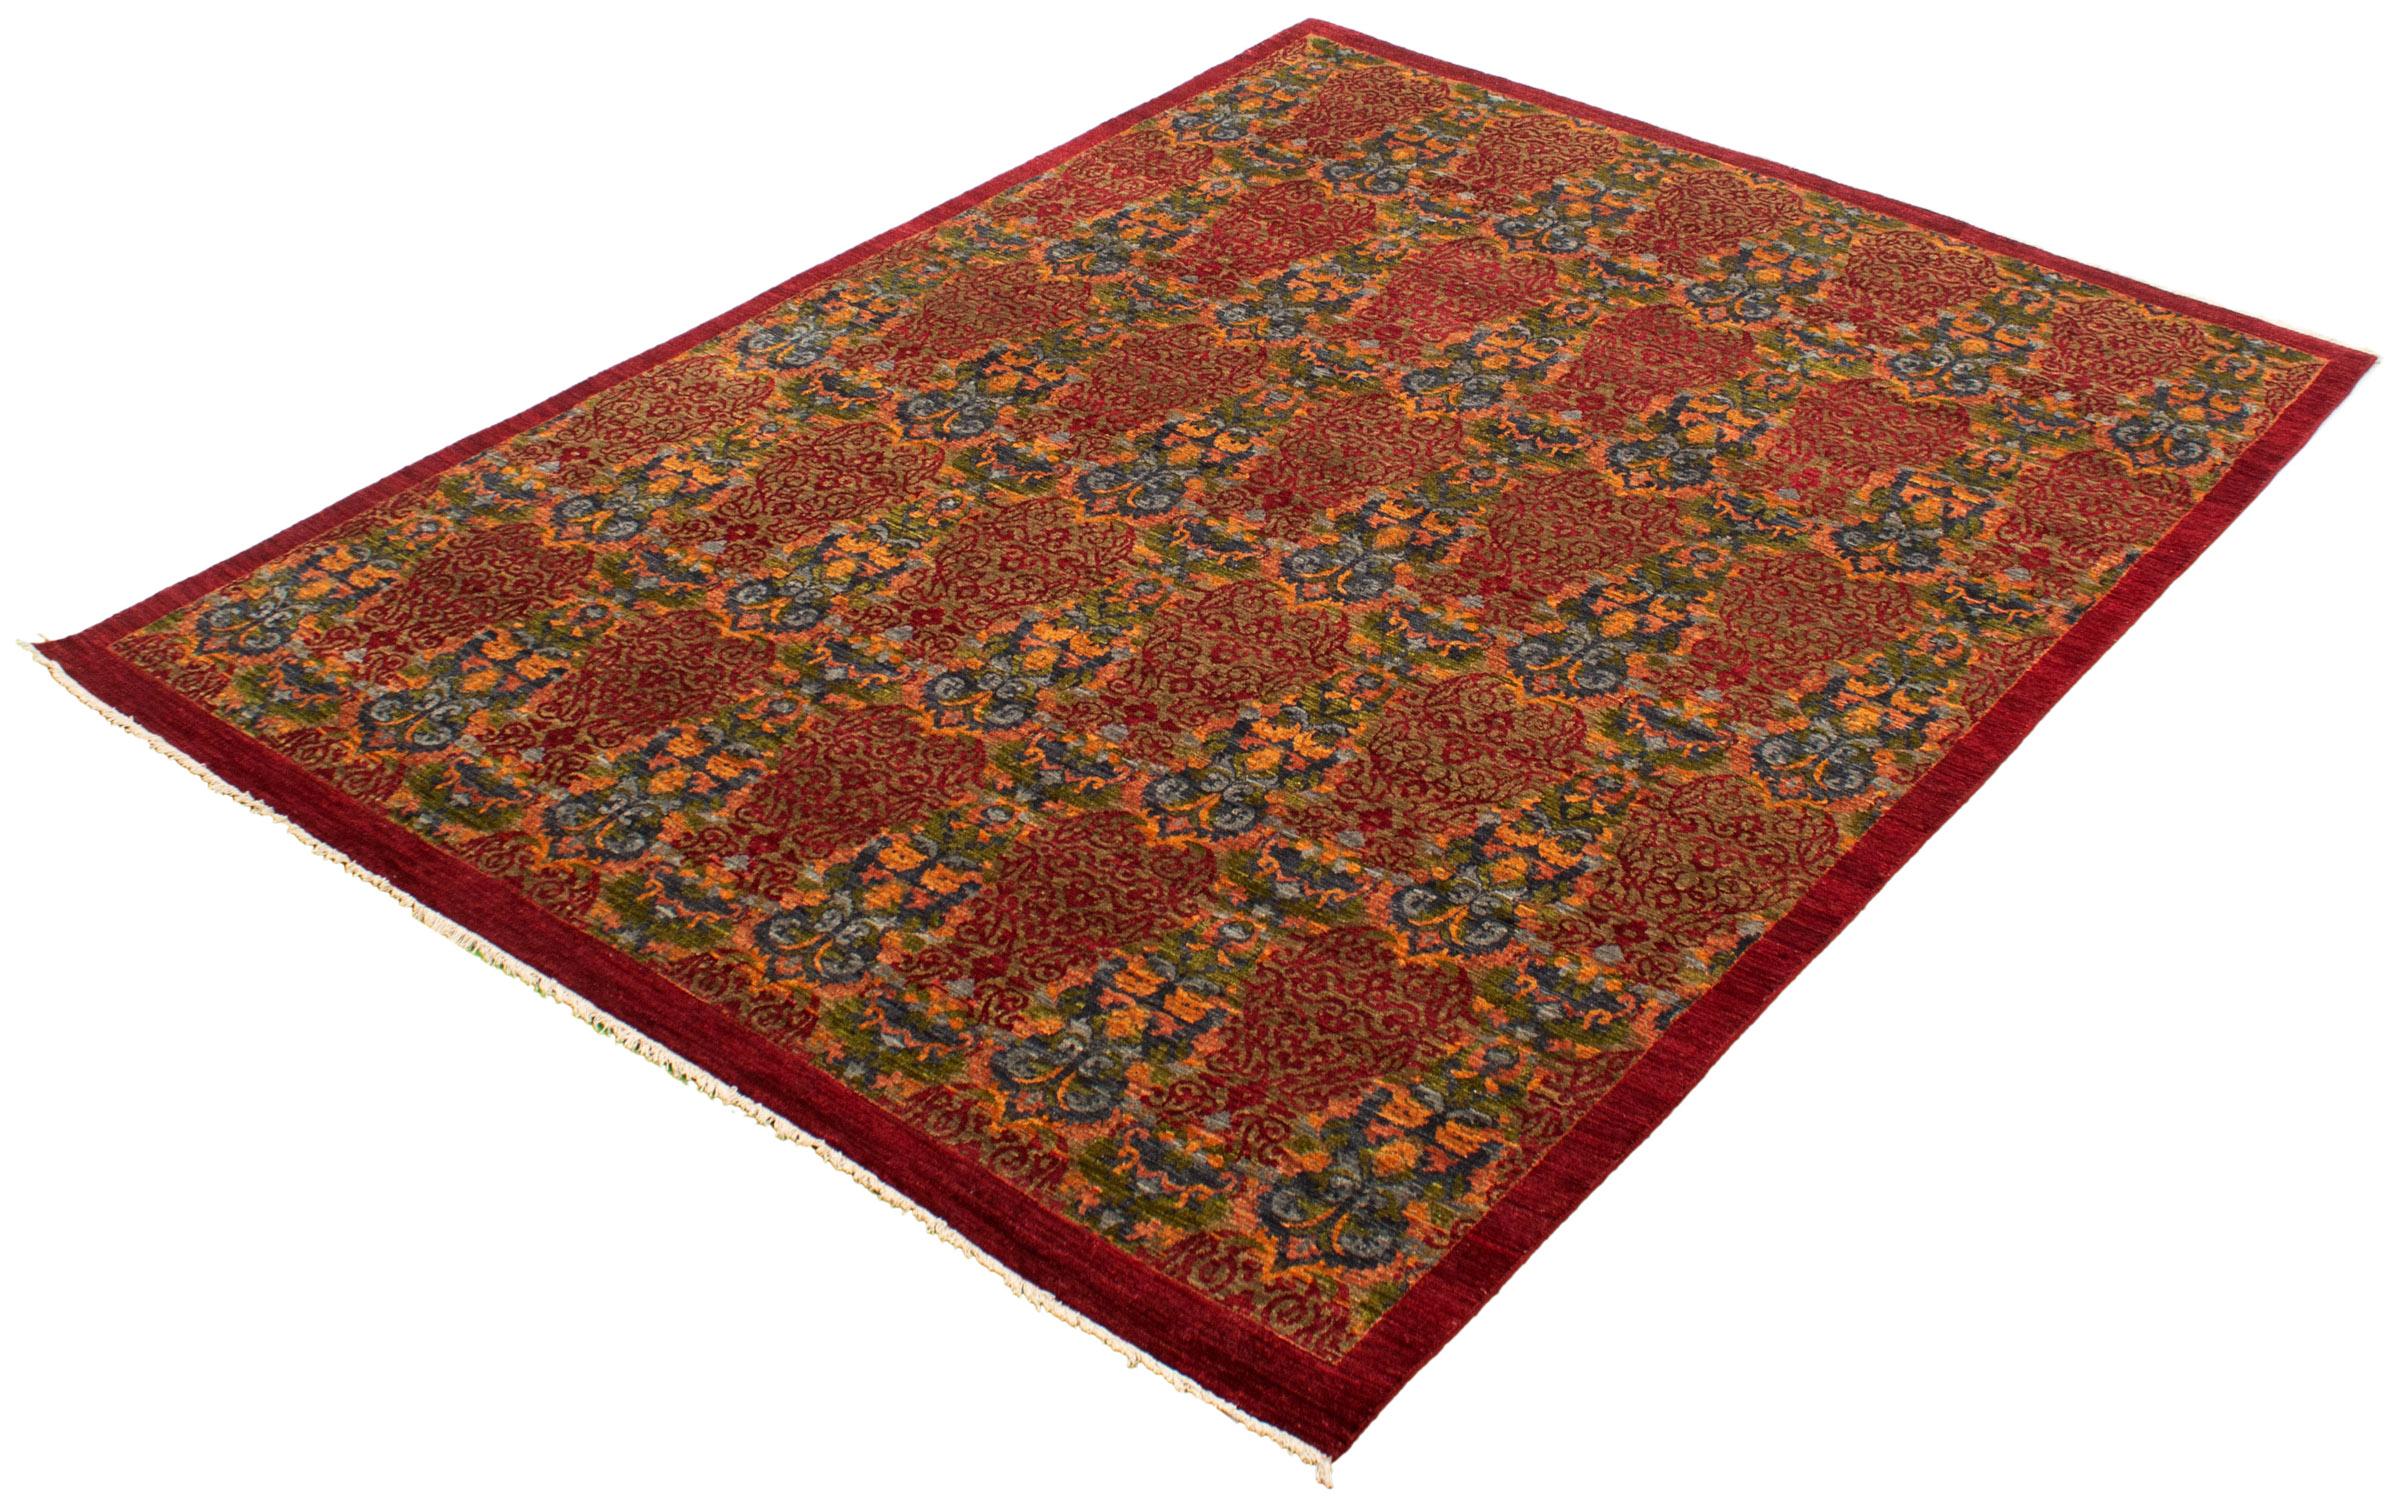 Persian Lahore Carpet, Transitional, Red, Taupe, Blue, and Green, Wool, 8’ x 10’ For Sale